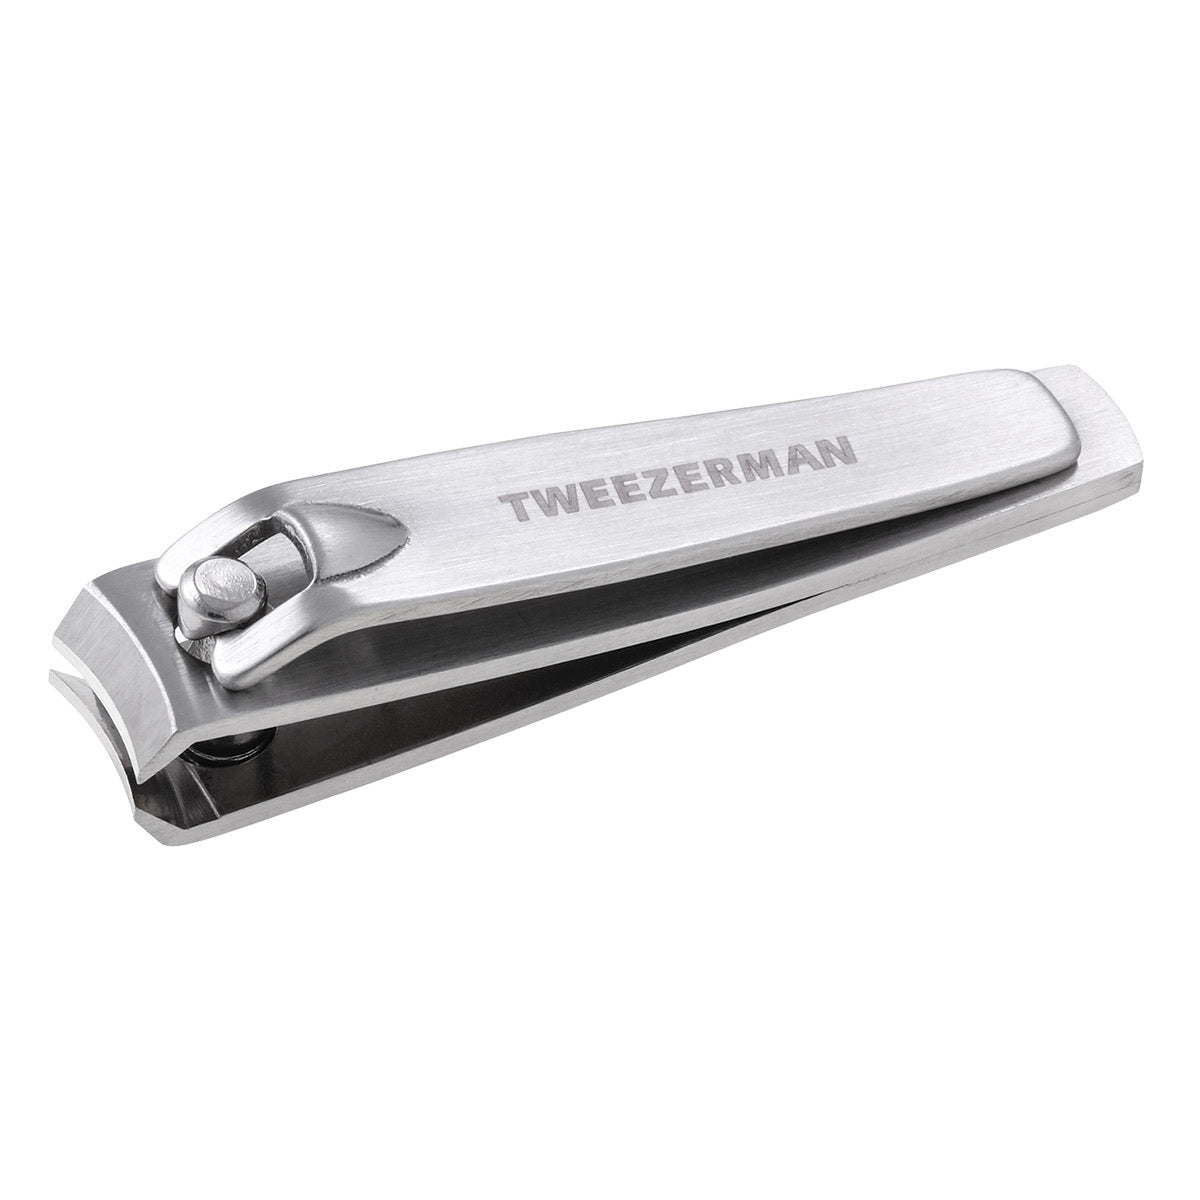 Primary image of Stainless Steel Fingernail Clipper